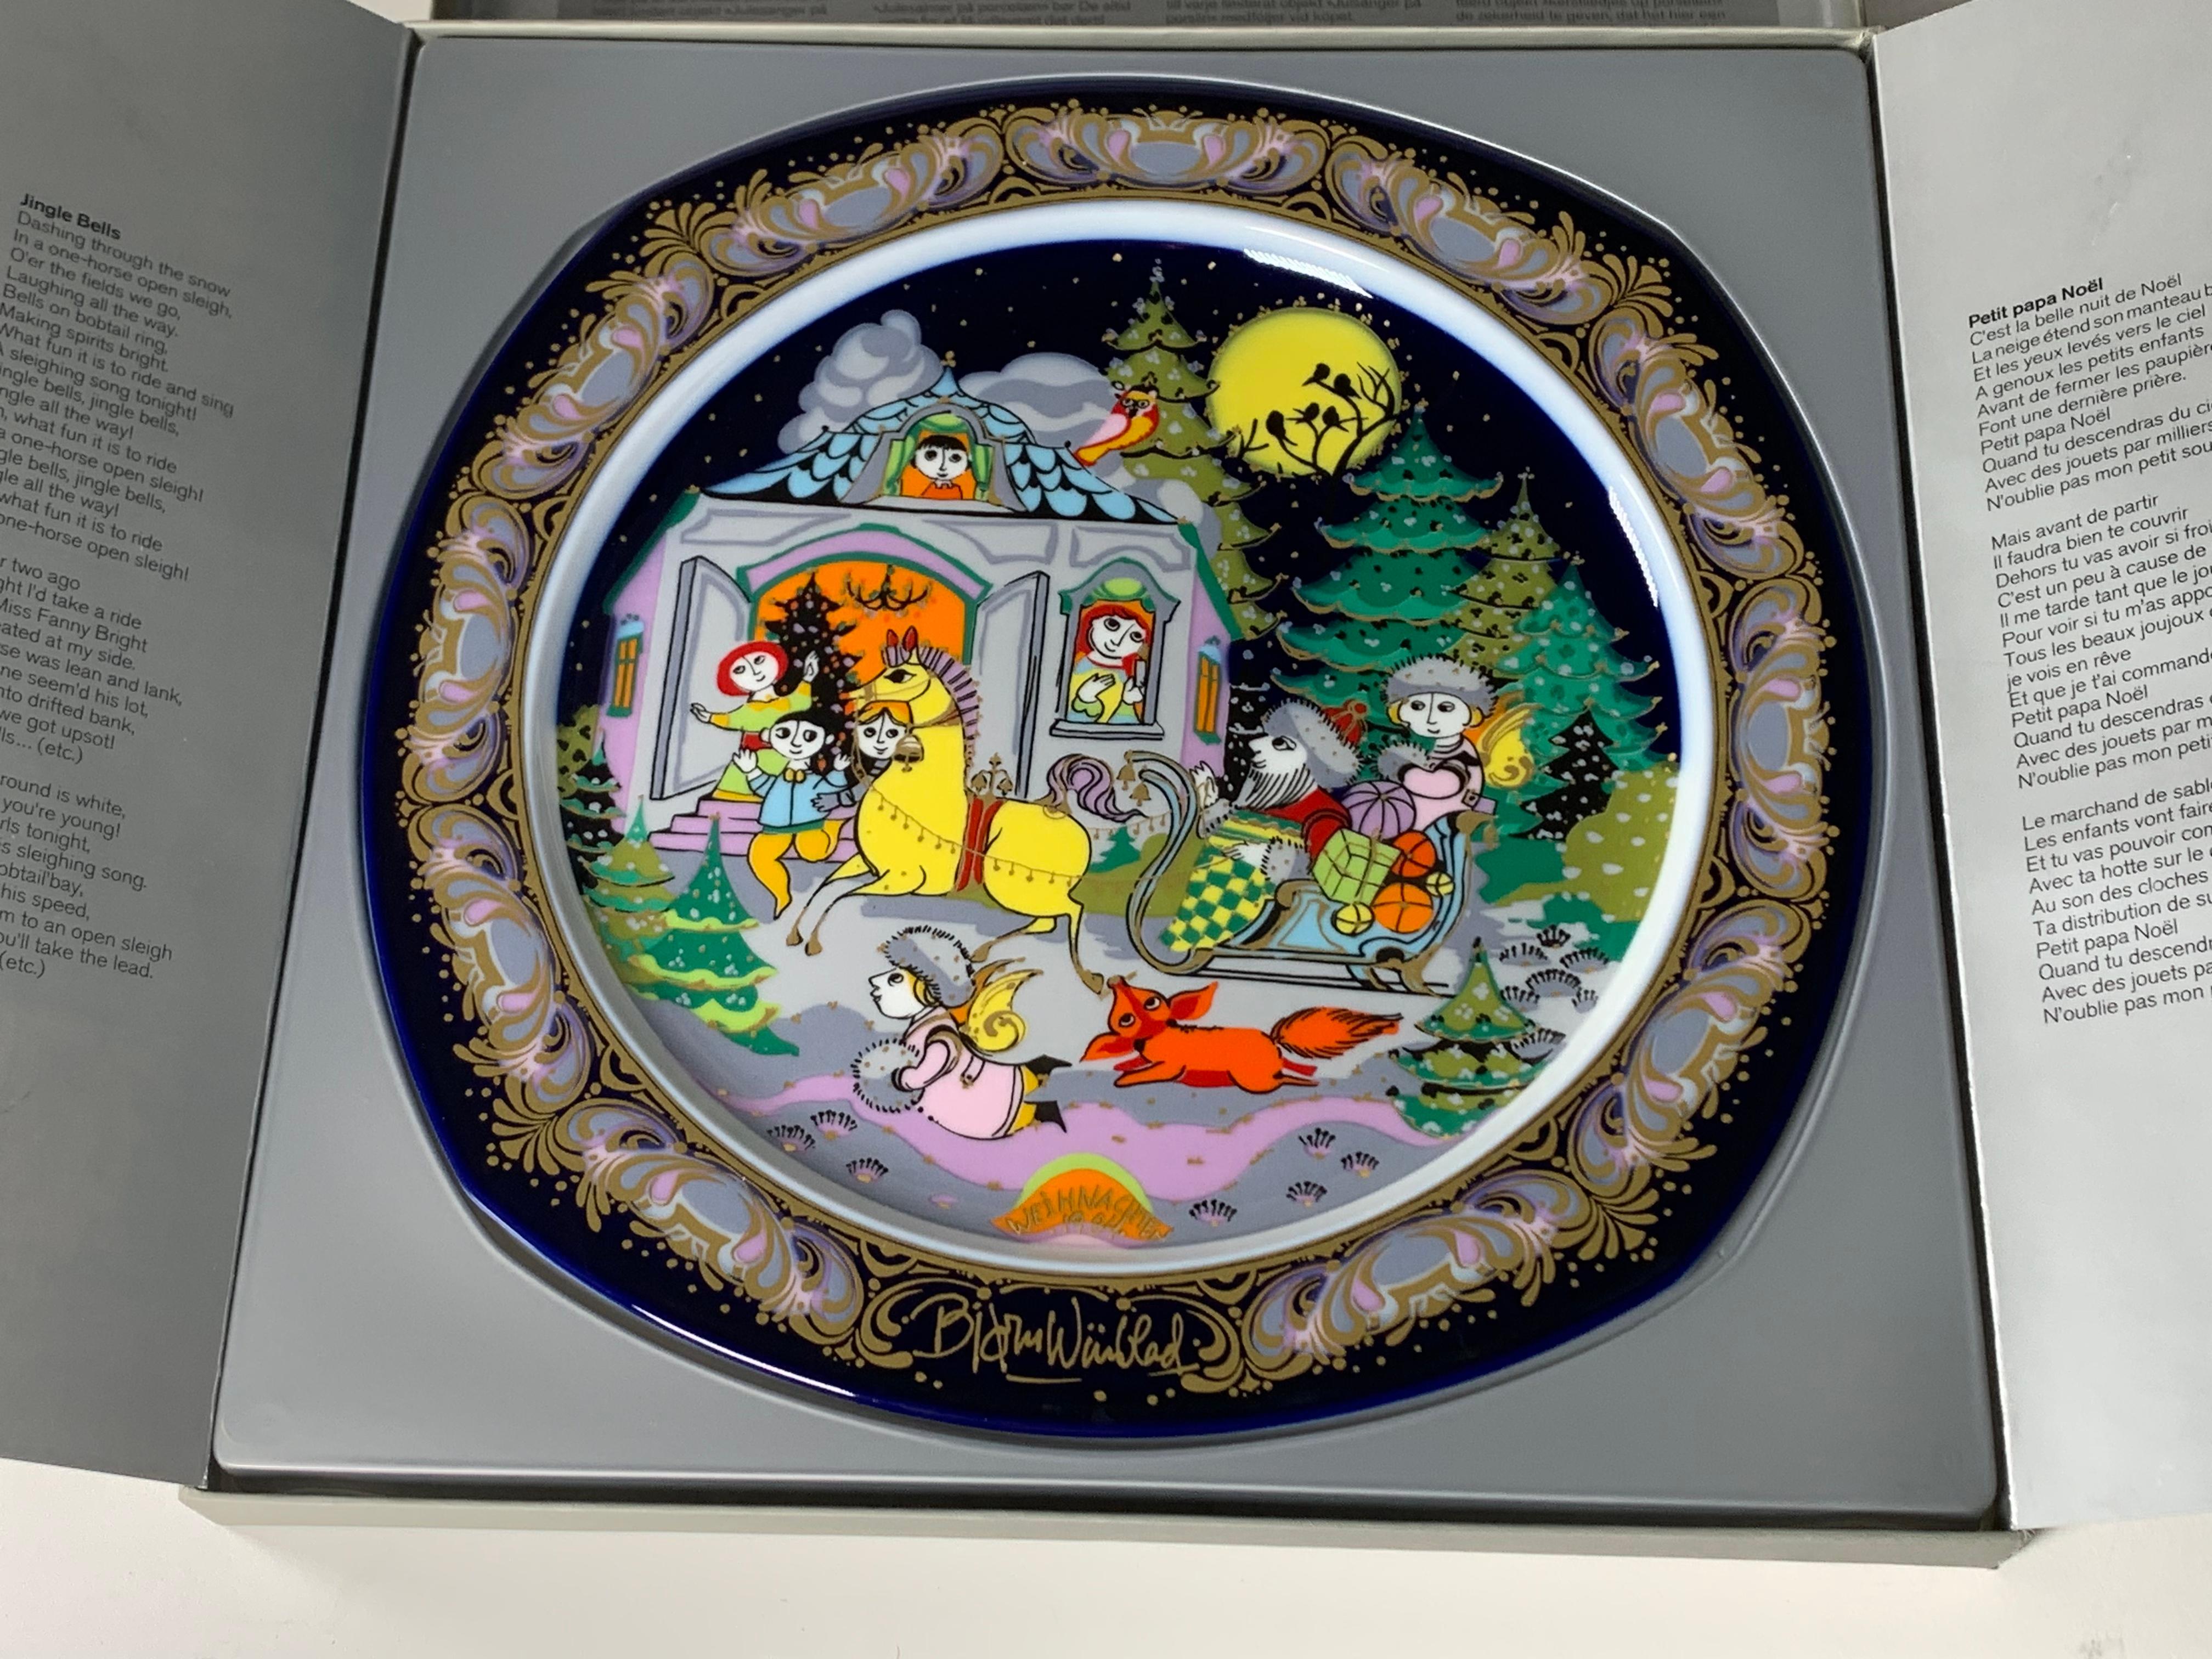 Porcelain Christmas plate from 1984 by Bjorn Wiinblad made by the German manufacturer Rosenthal. The dish is titled “Jingle Bells” and is reason no. 2 of the series. When Rosenthal asked the Danish artist to illustrate a new series of dishes, he